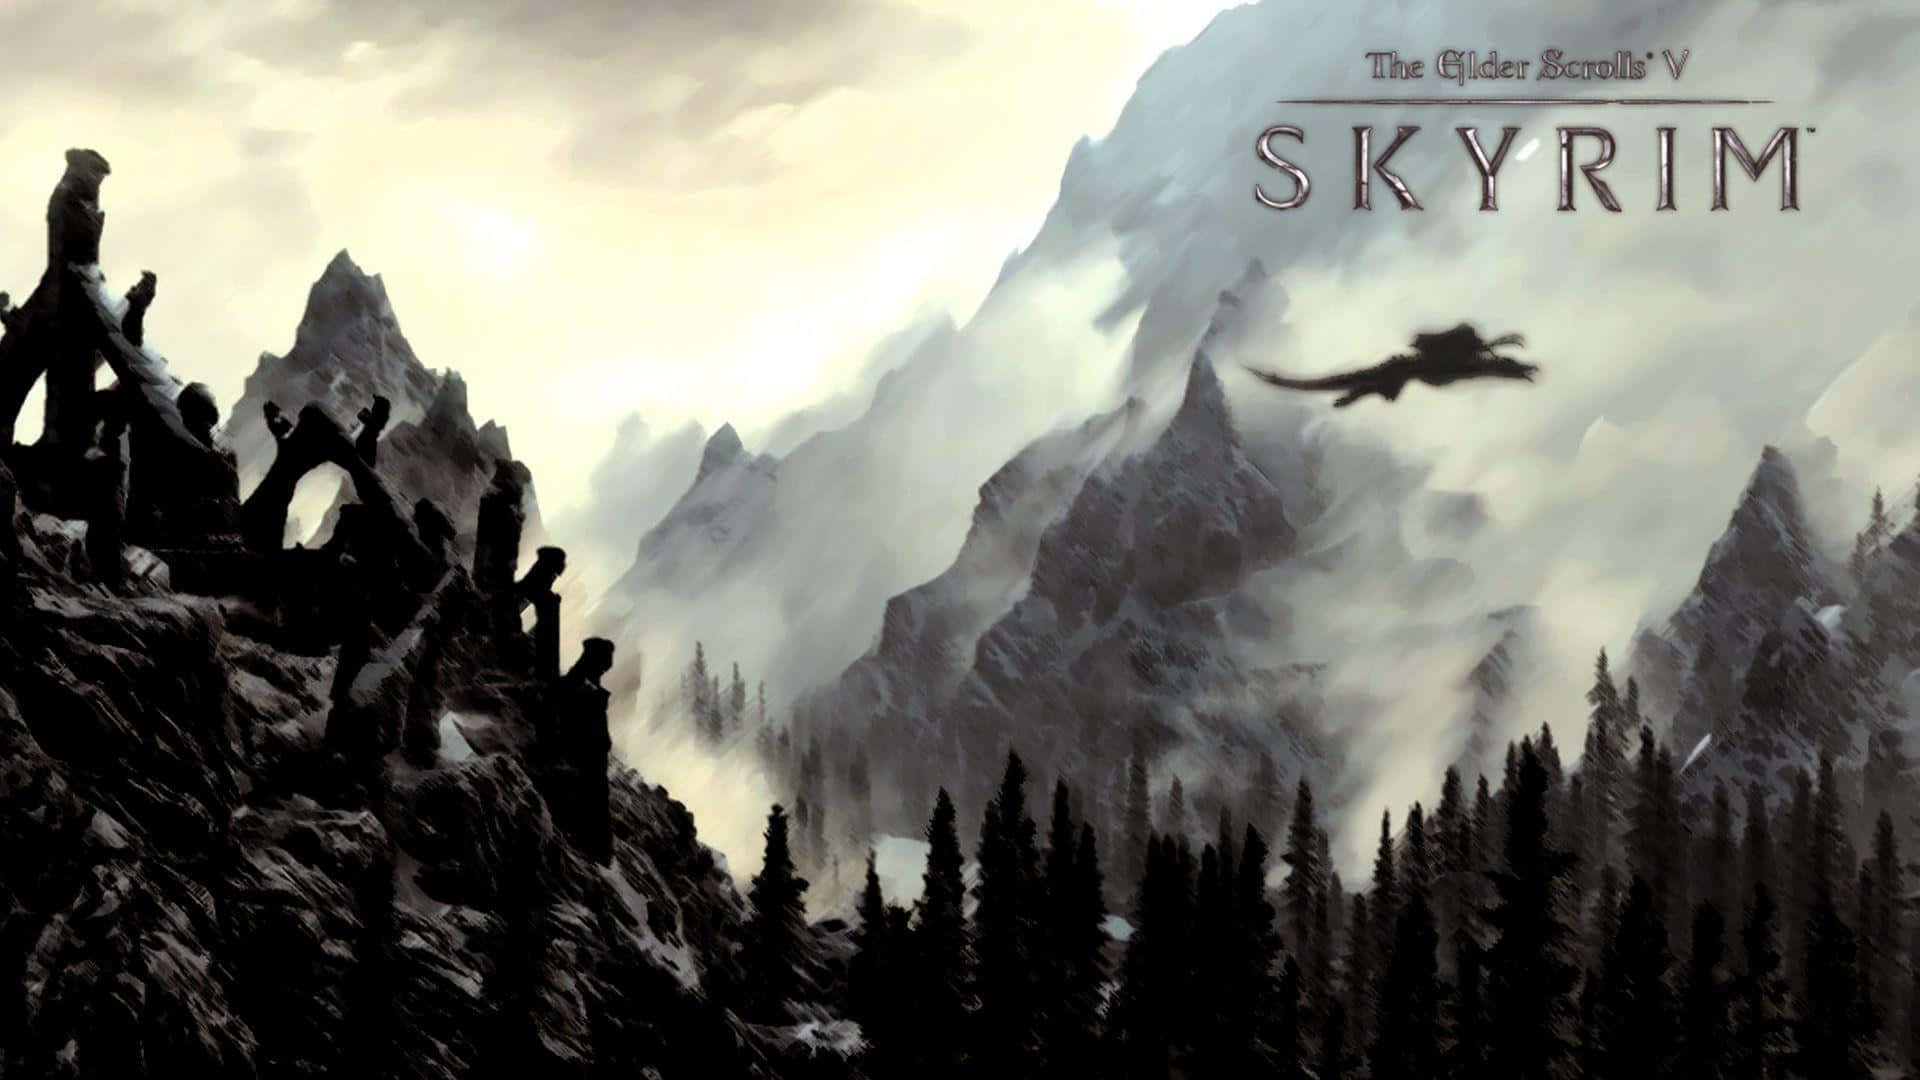 The Dragonborn facing a powerful dragon amidst the vast mountains of Skyrim.